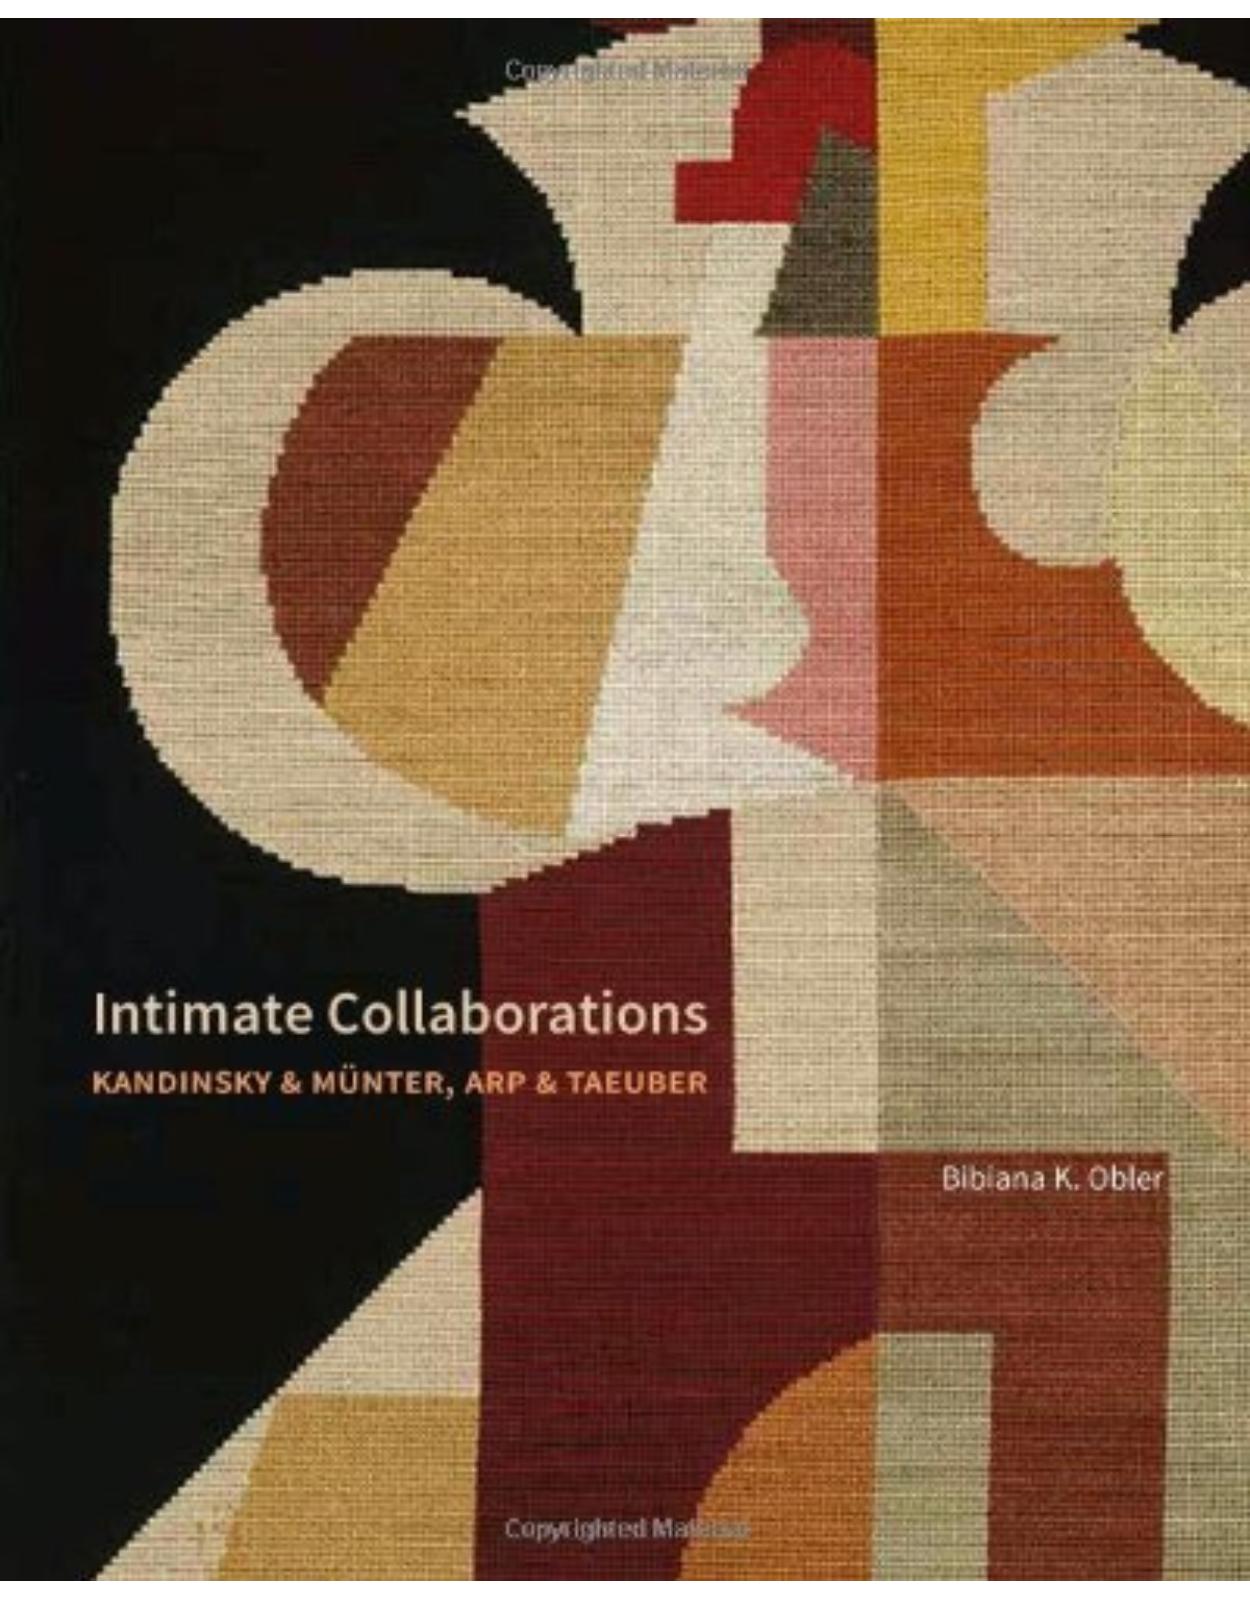 Intimate Collaborations. Kandinsky and Munter, Arp and Taeuber